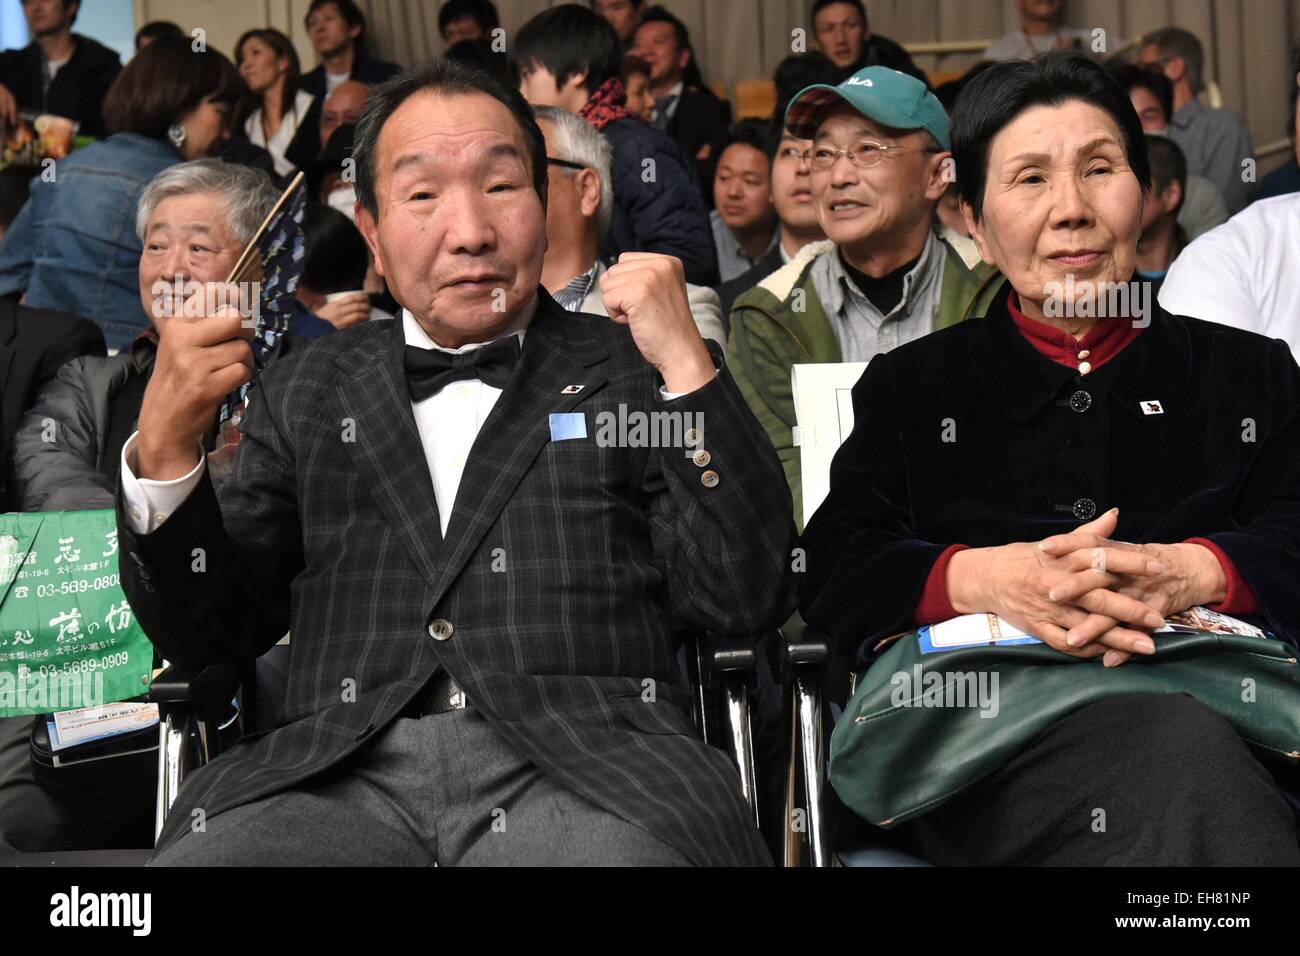 (L-R) Iwao Hakamada, Hideko Hakamada, MARCH 5, 2015 - Boxing : Iwao Hakamada attends the boxing event with his sister Hideko Hakamada at Korakuen Hall in Tokyo, Japan. Iwao Hakamada is a Japanese former professional boxer who was sentenced to death on September 11, 1968 and ended up spending 45 years on death row. In 2011 the Guinness World Records certified Hakamada as the world's longest-held death row inmate. In March 2014, he was granted a retrial and an immediate release when the Shizuoka district court found there was reason to believe evidence against him had been falsified. (Photo by H Stock Photo